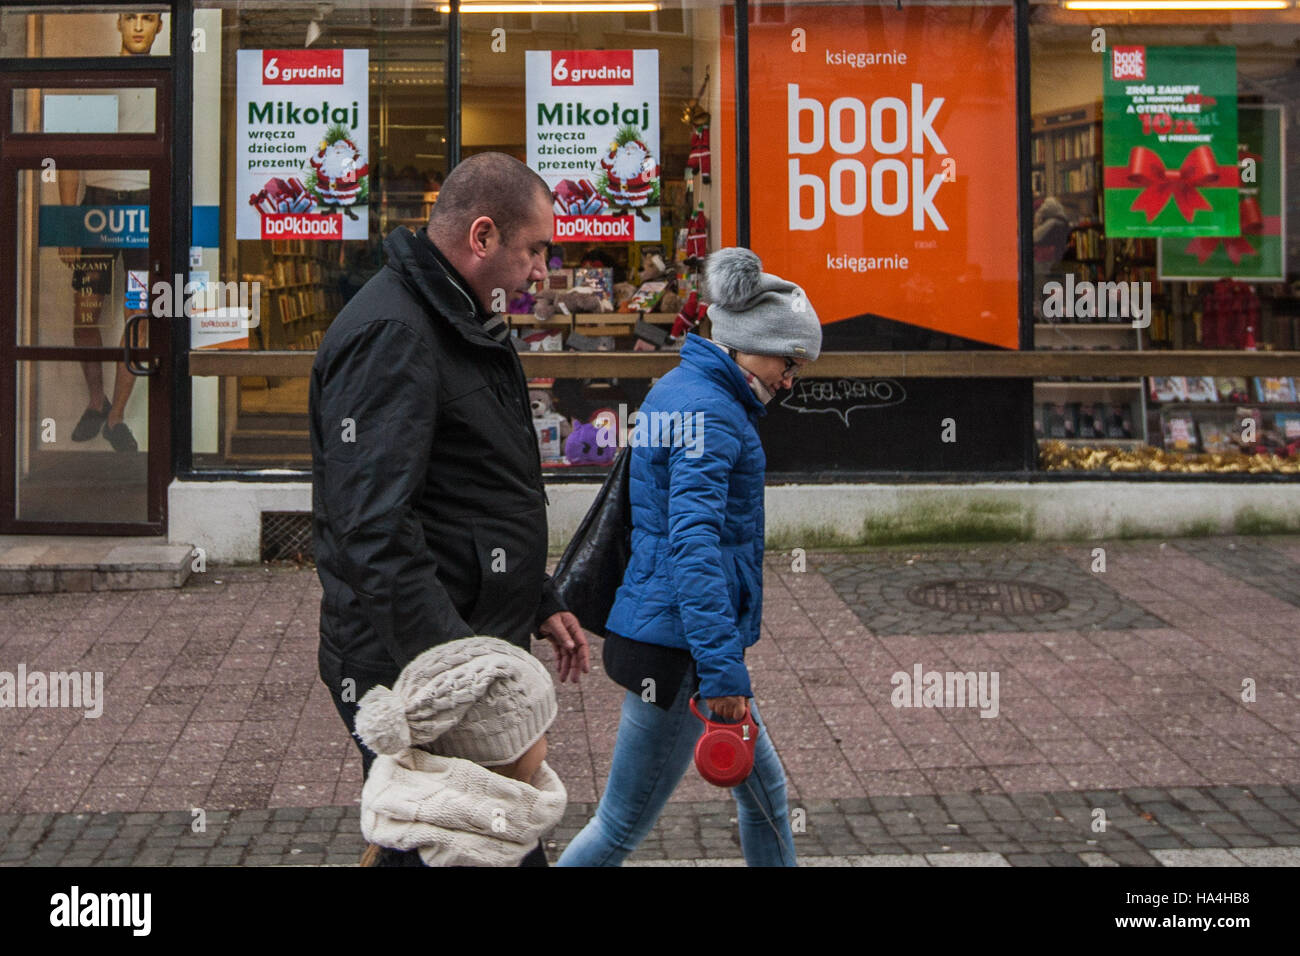 Sopot, Poland 27 November 2016 Cold day in Sopot. People walking in winter clothes in front of Book Book bookstore decorated on Christmas seazon are seen. Meteorologists predict high snow fall in nex few hours. Credit:  Michal Fludra/Alamy Live News Stock Photo